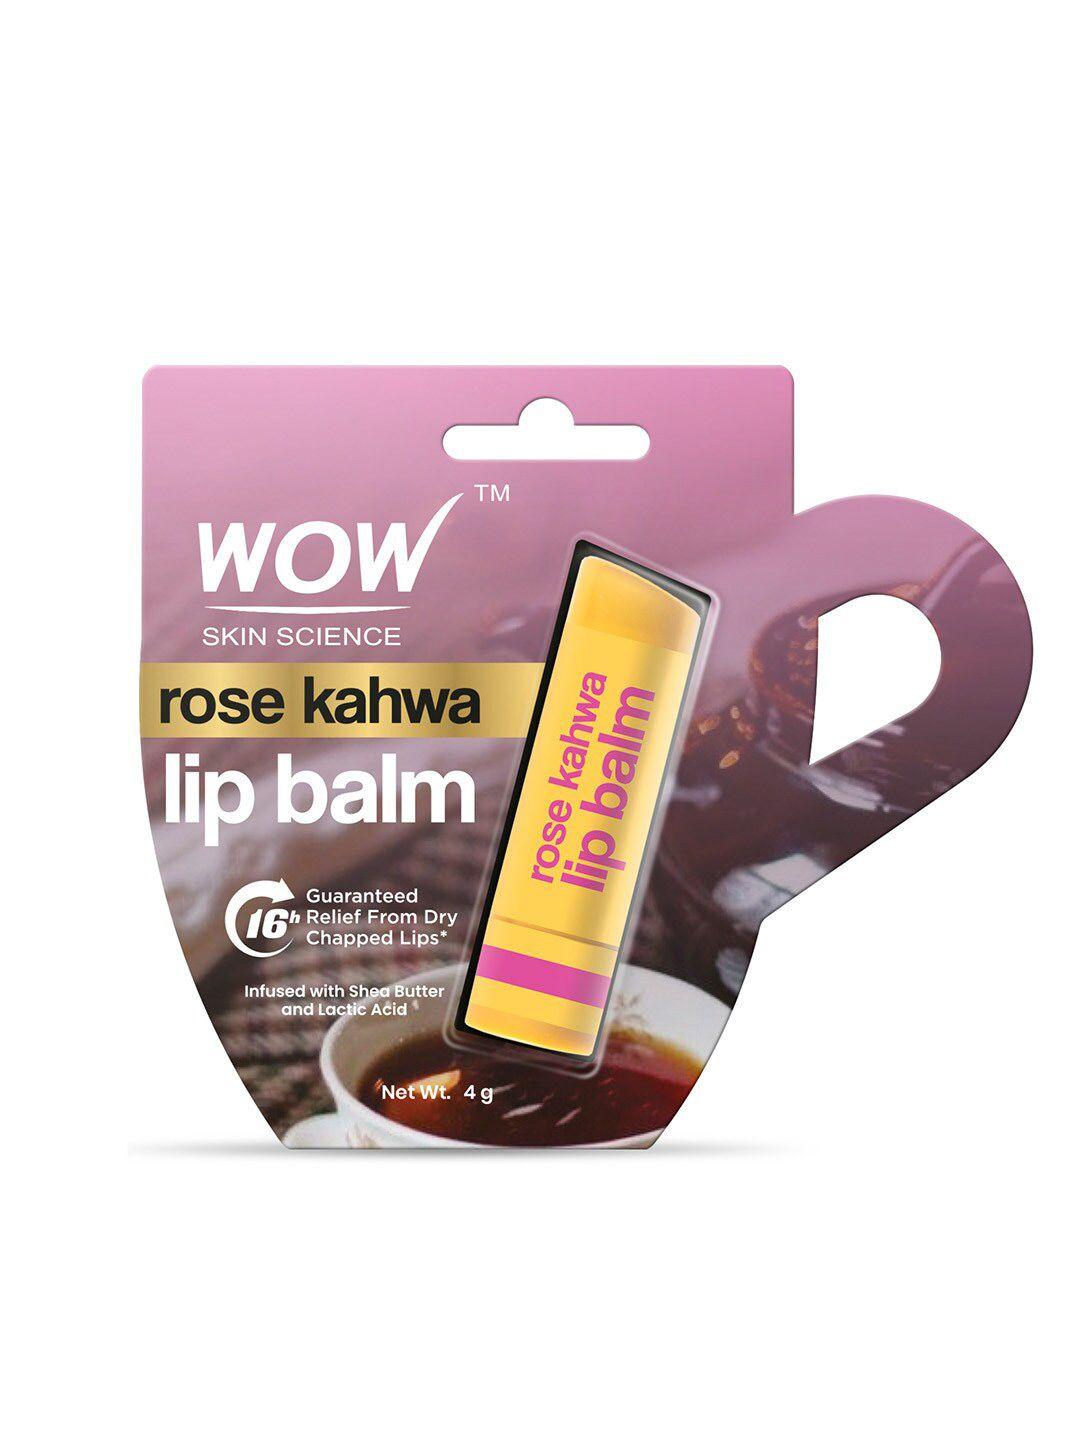 wow skin science rose kahwa lip balm with shea butter & lactic acid 4 g - pink